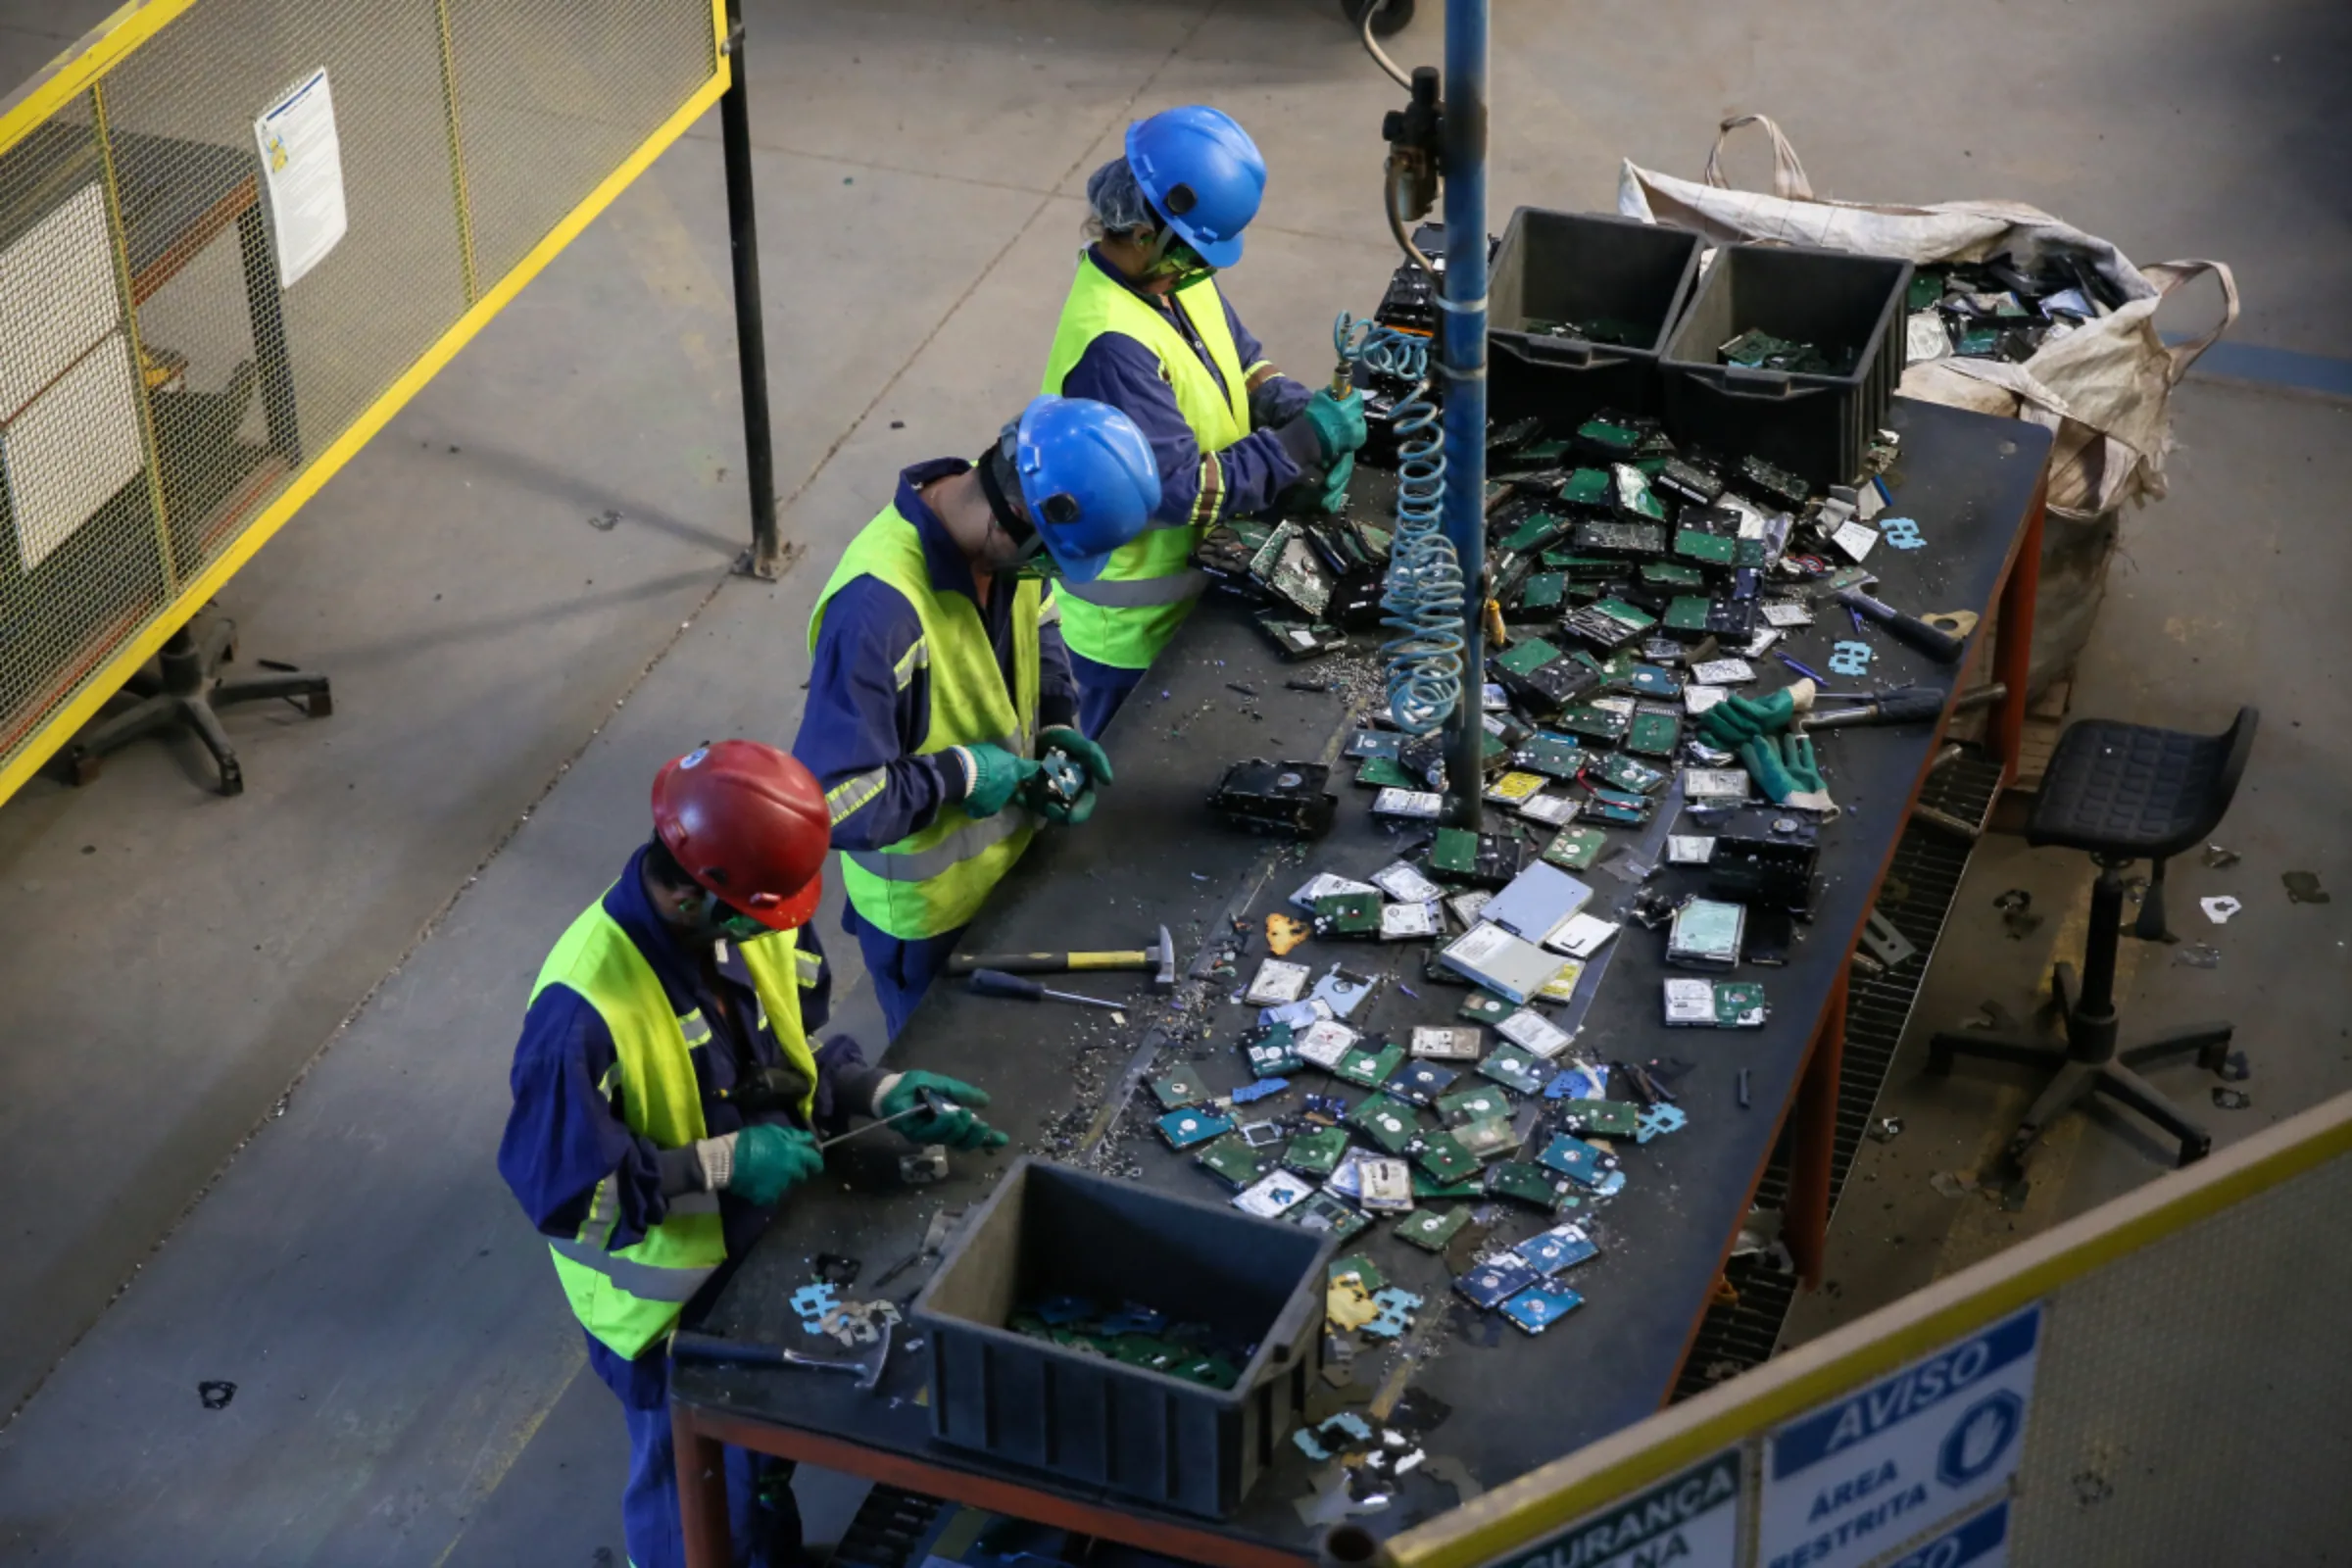 A group of workers at a landfill in Caieiras pick through tech garbage for precious minerals, in Caieiras, Brazil, July 22, 2022